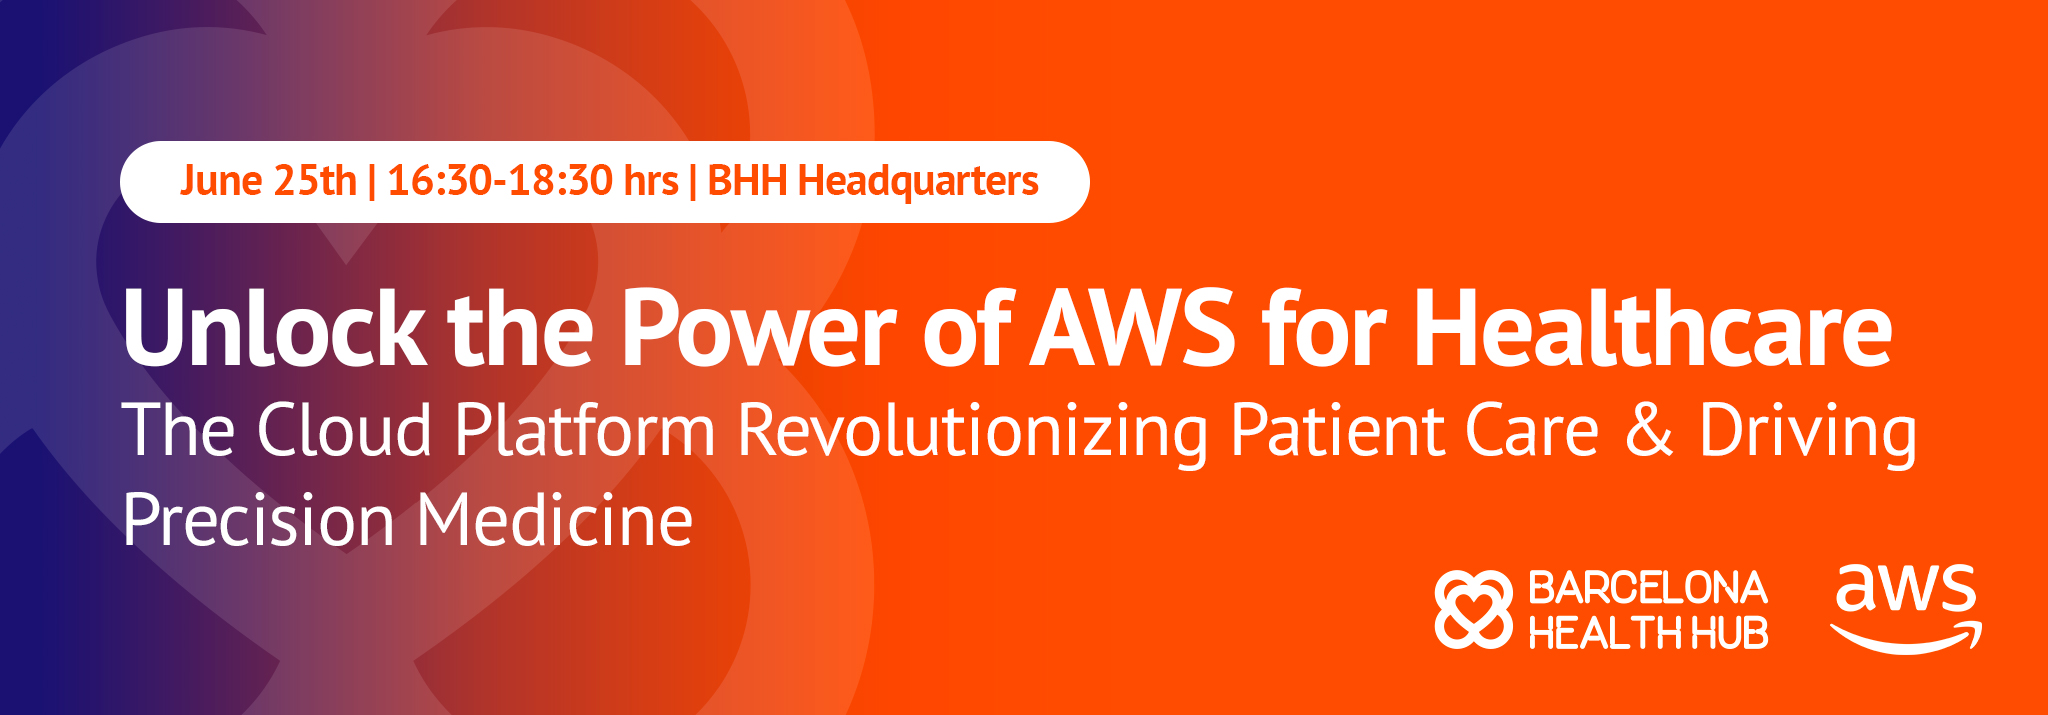 Unlock the Power of AWS for Healthcare